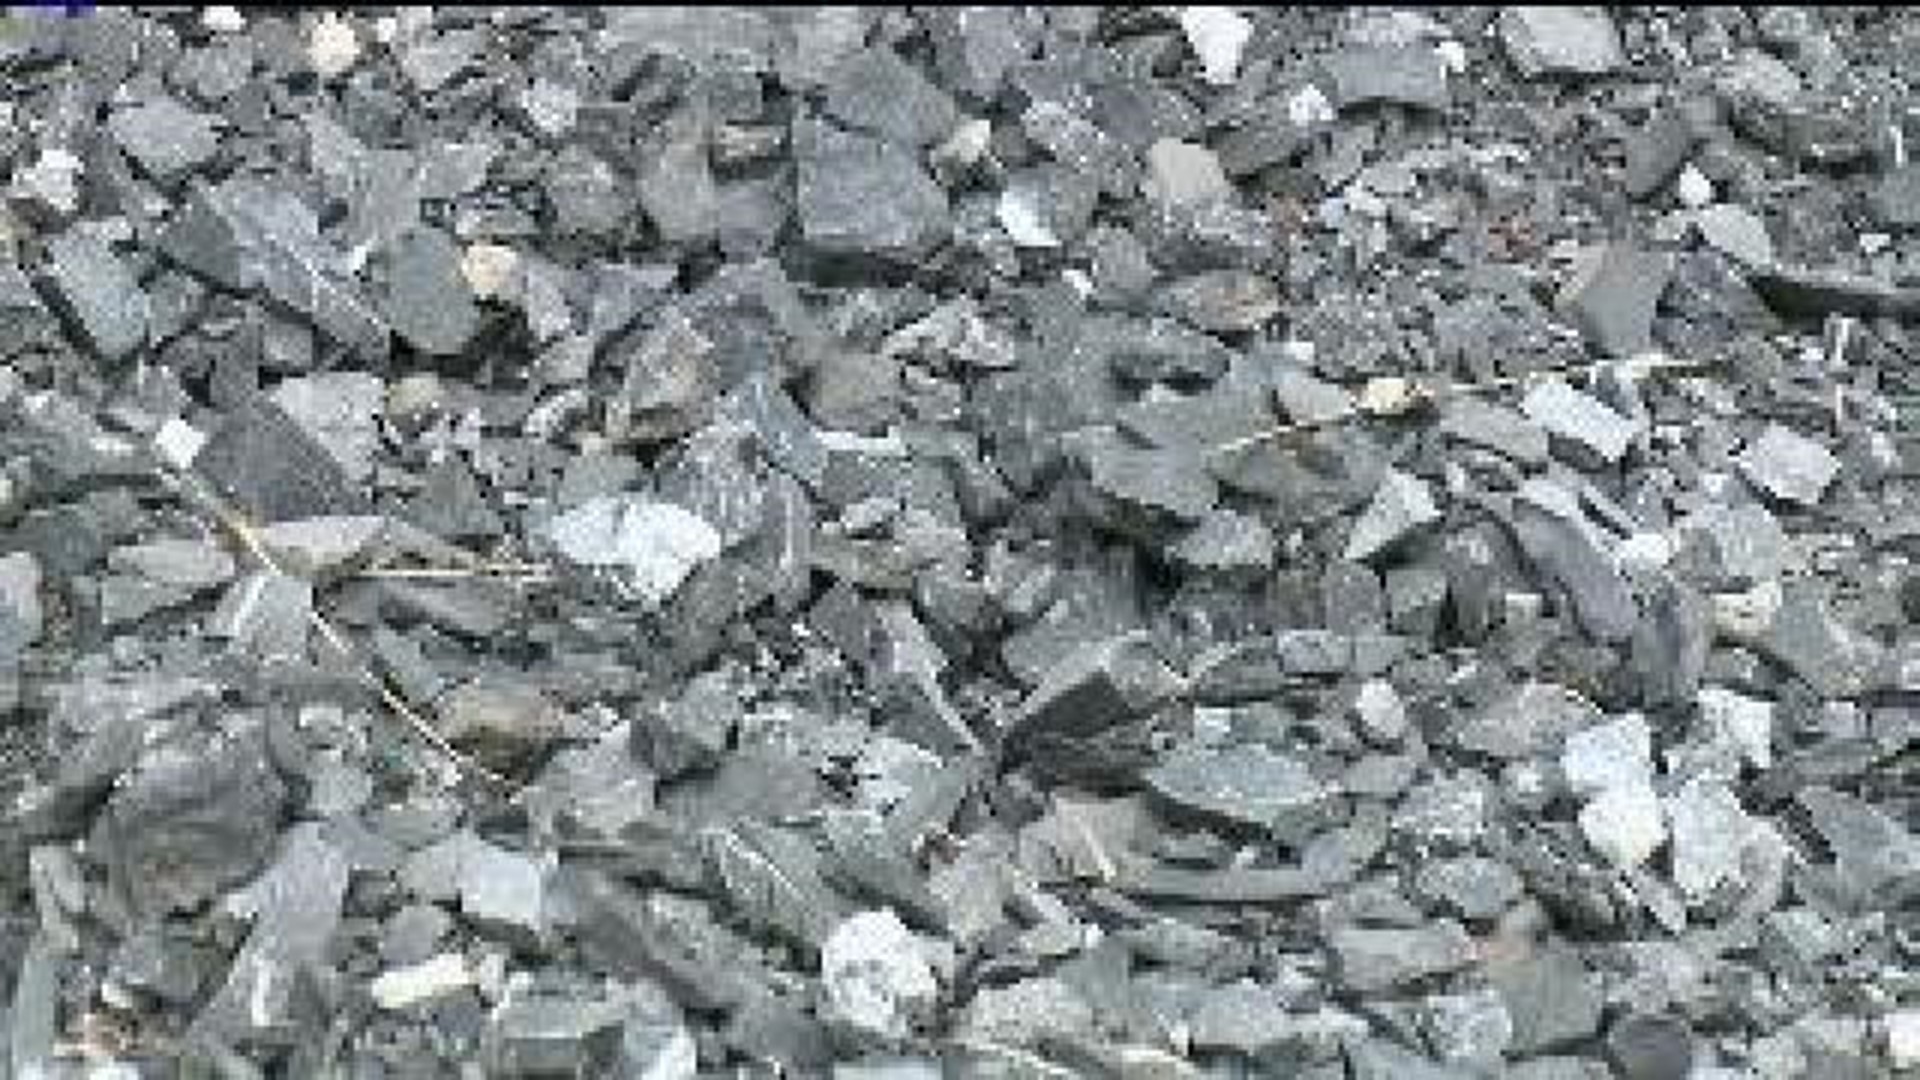 Teens Charged For Hitting Trucks With Rocks